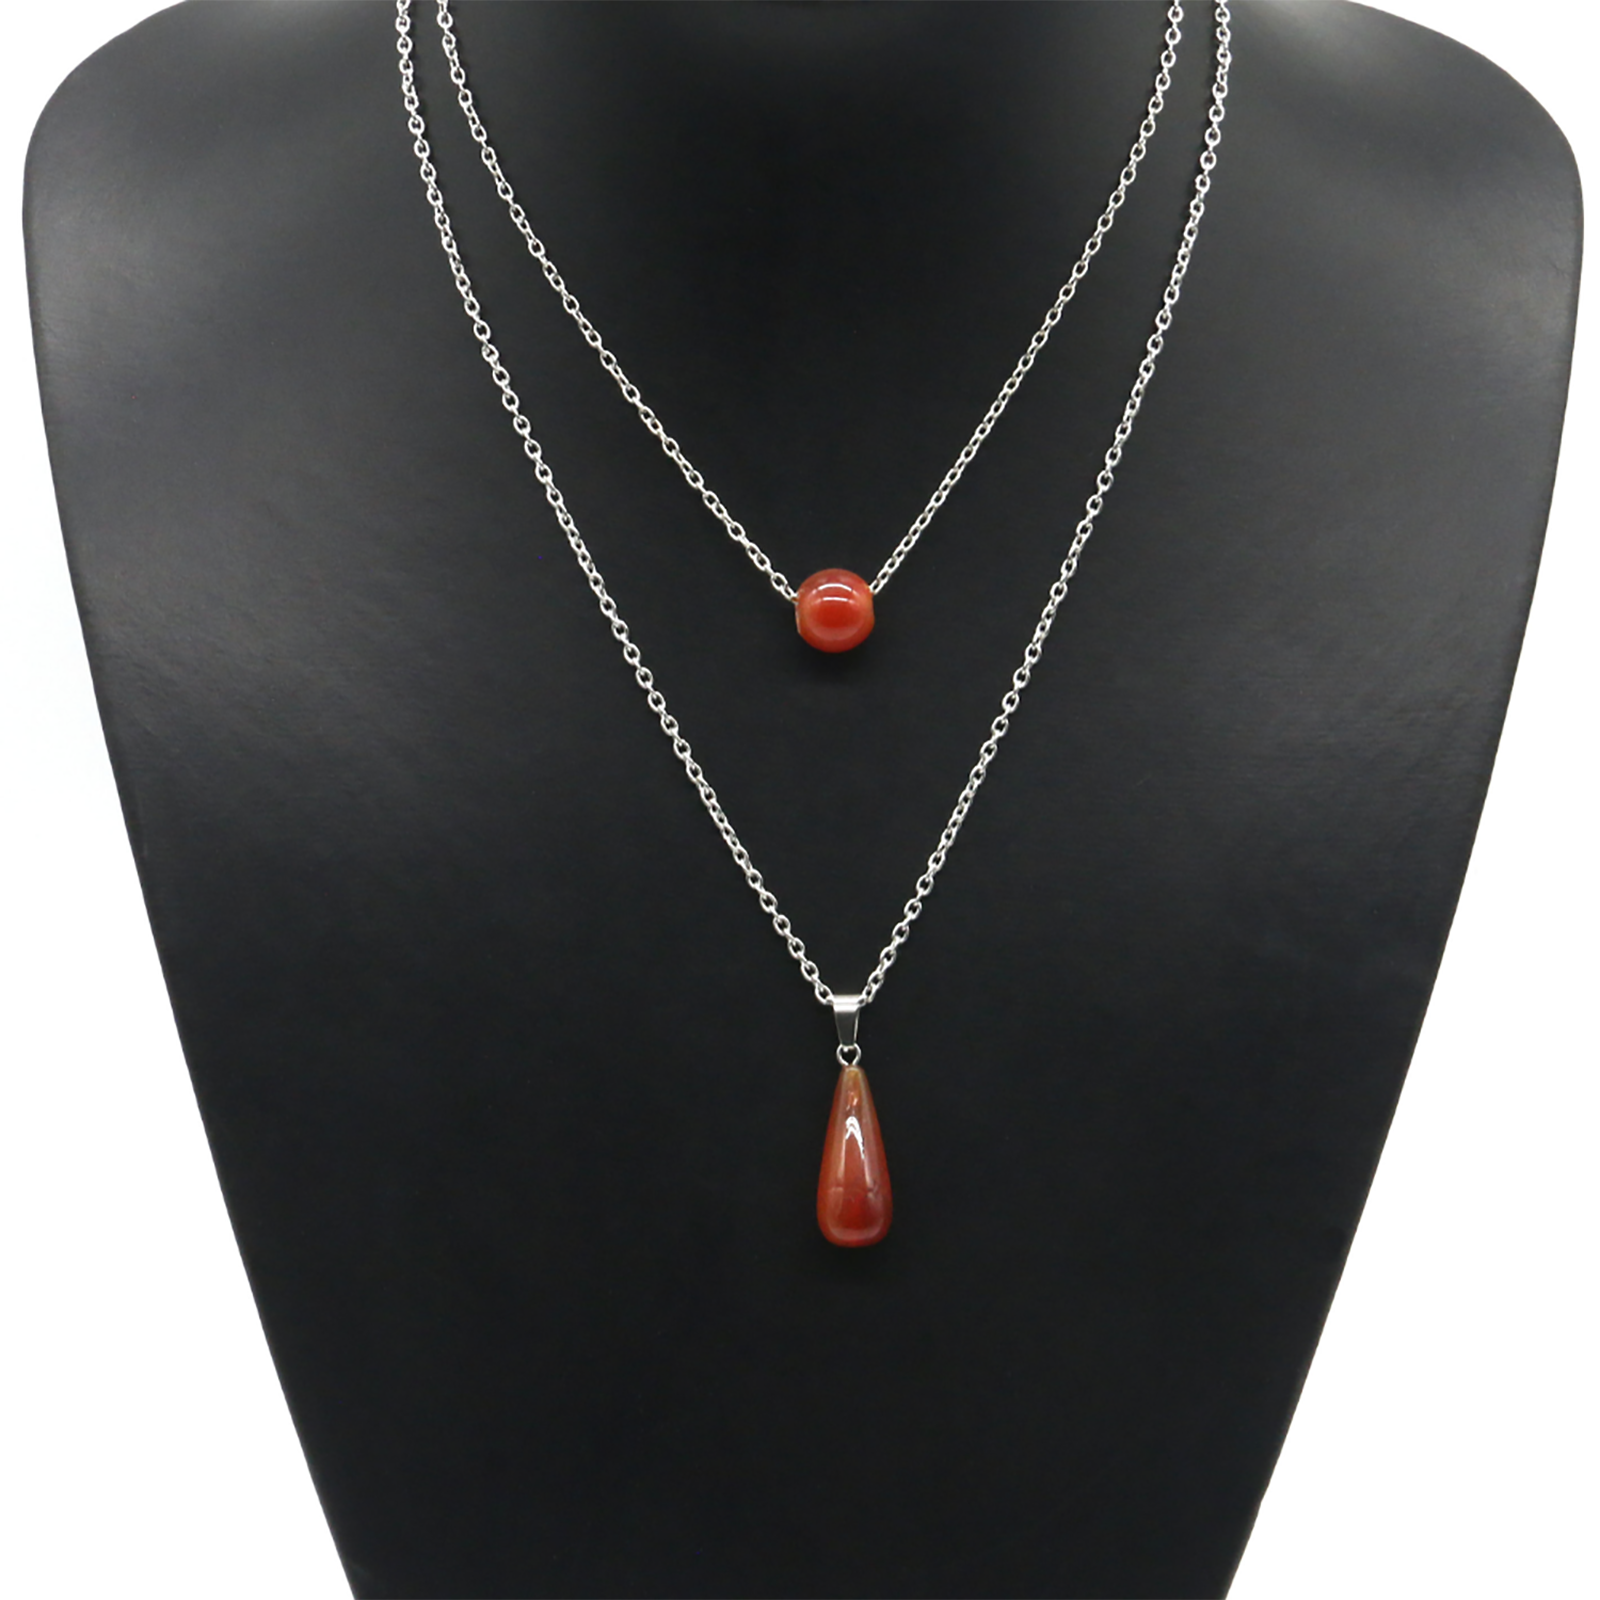 1:Red agate